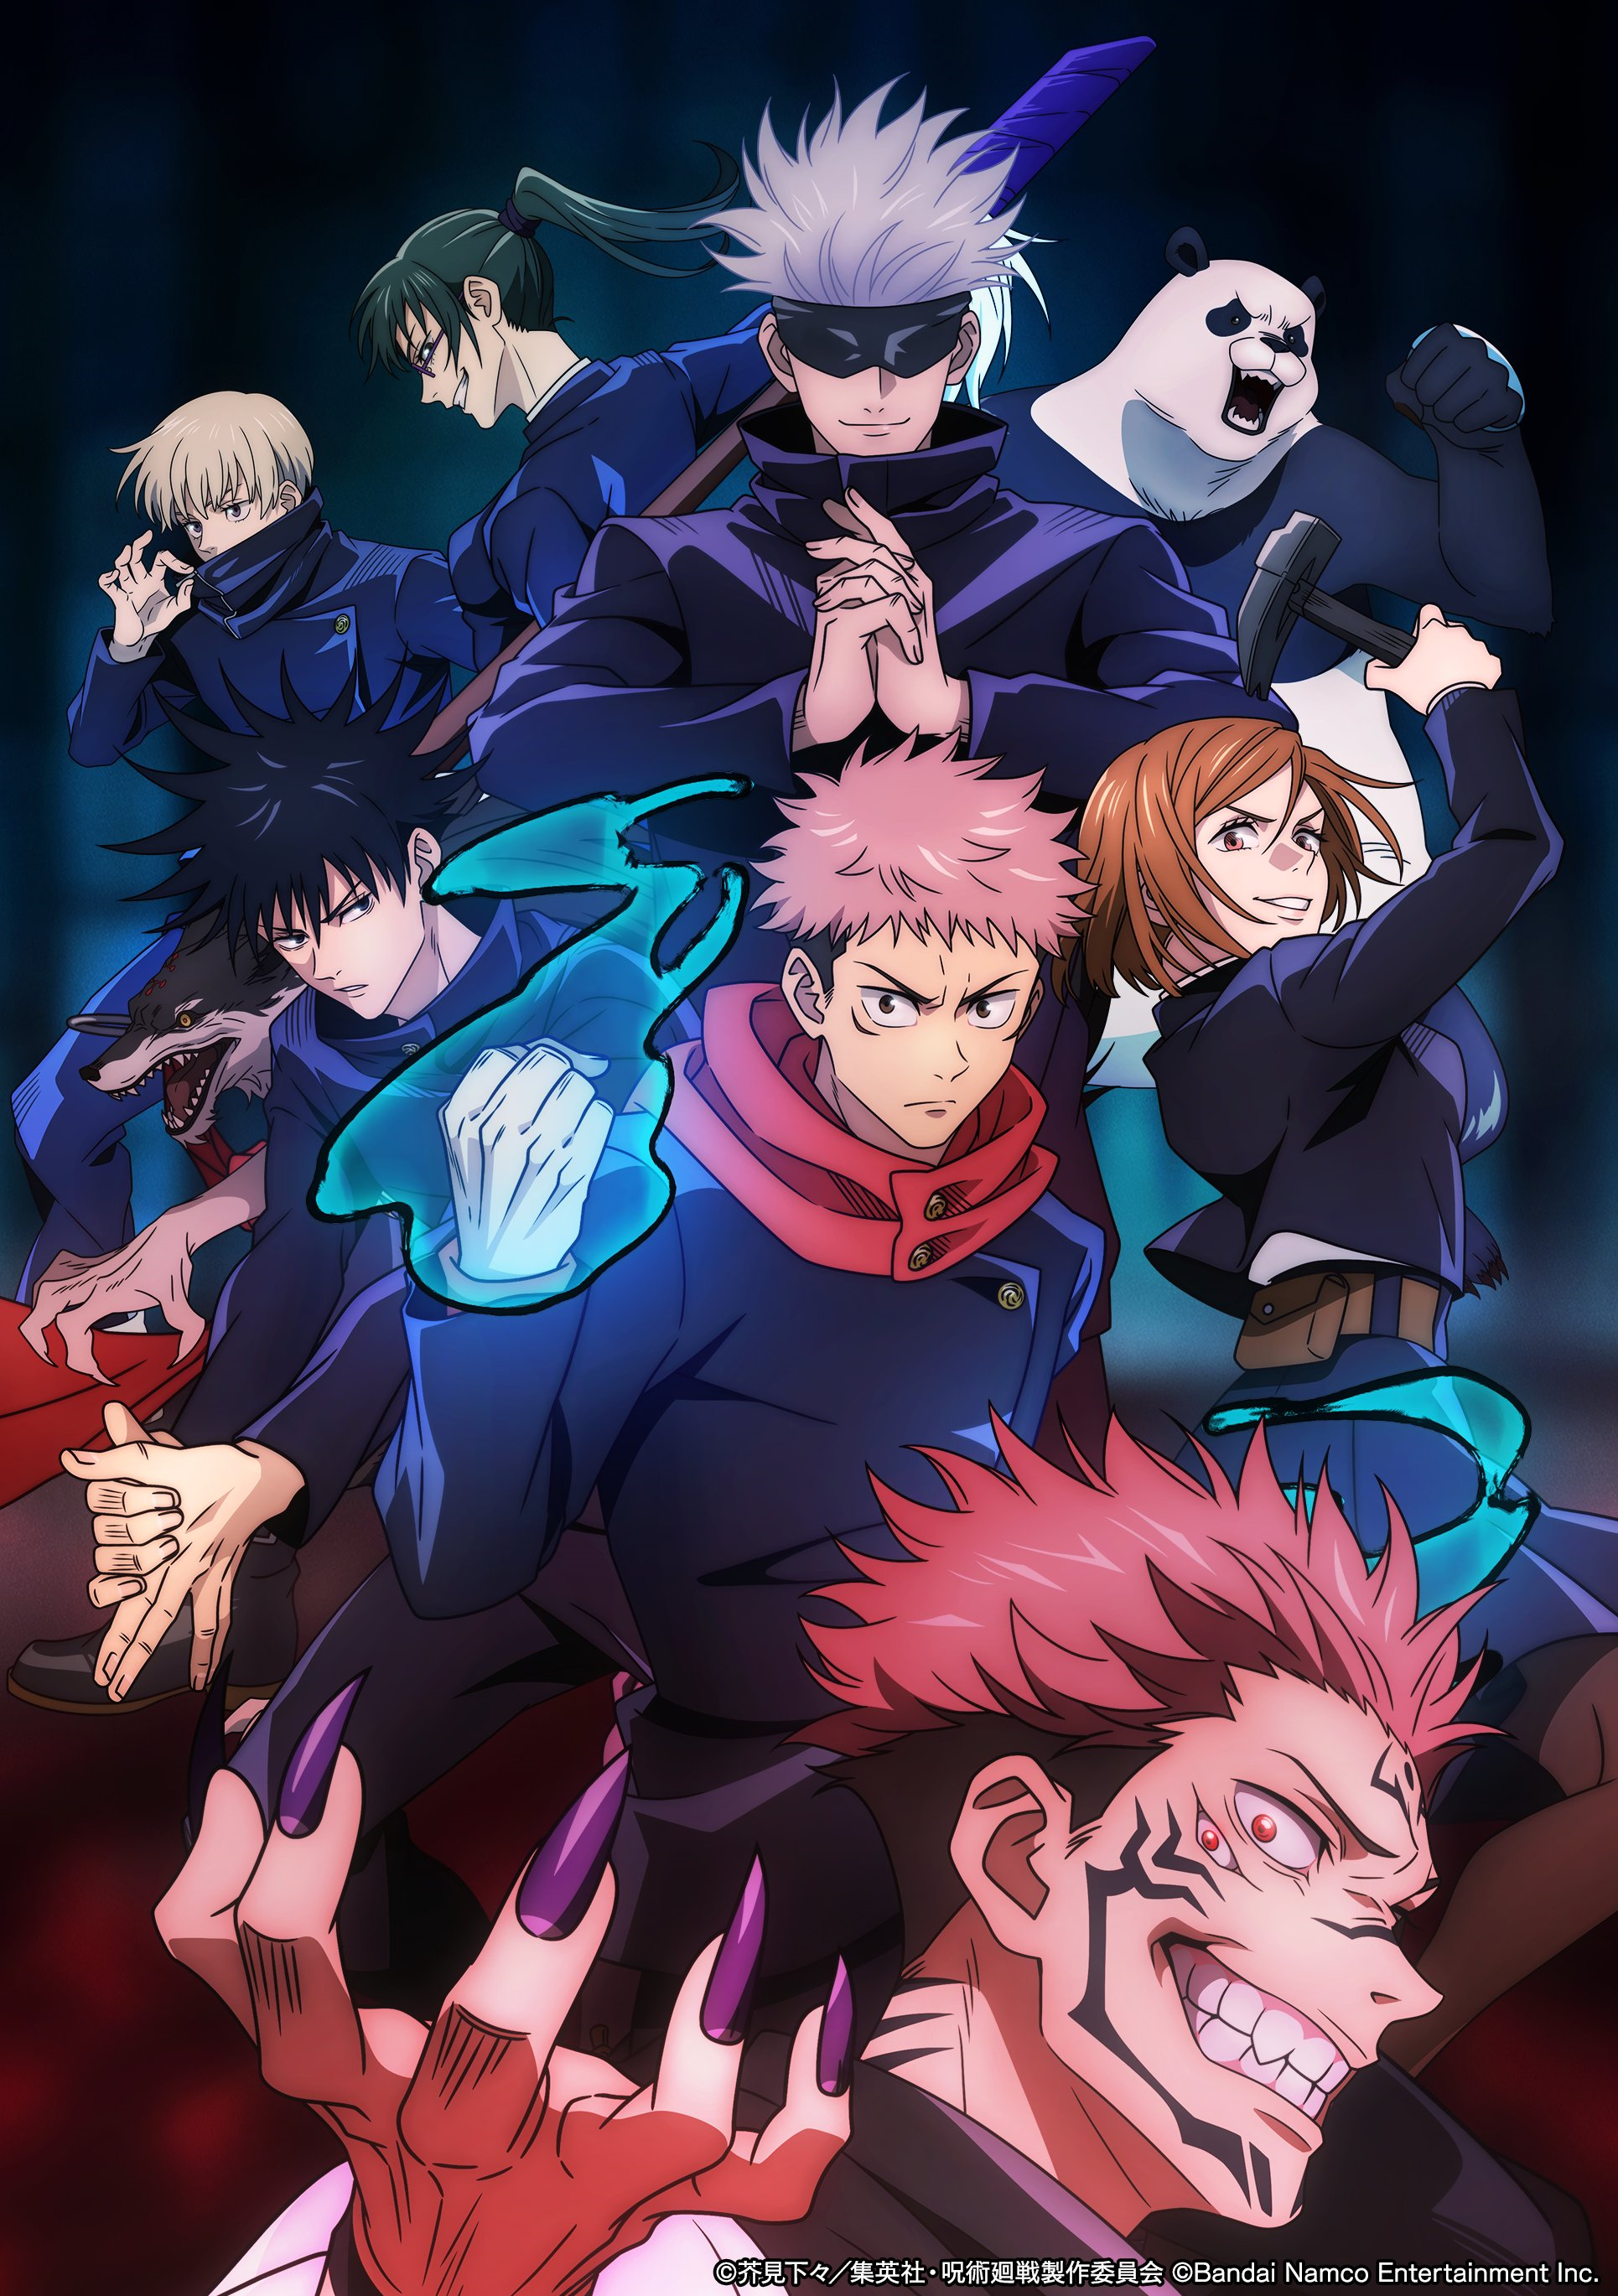 Jujutsu Kaisen 0: The Movie Reveals New Image and Premiere Date